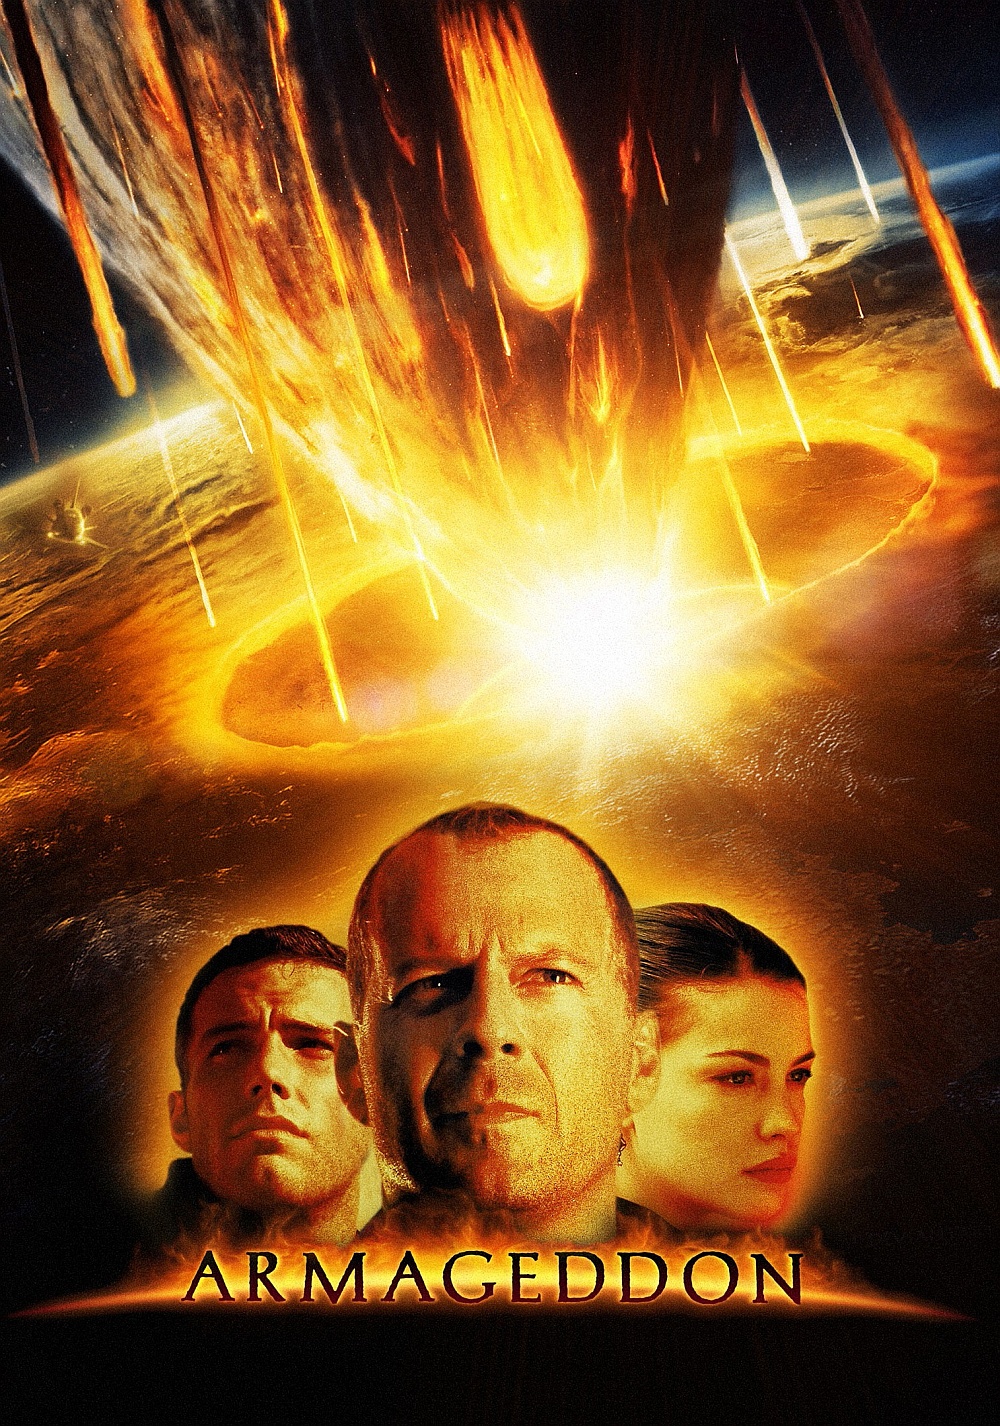 Armageddon Movie Poster - ID: 72977 - Image Abyss